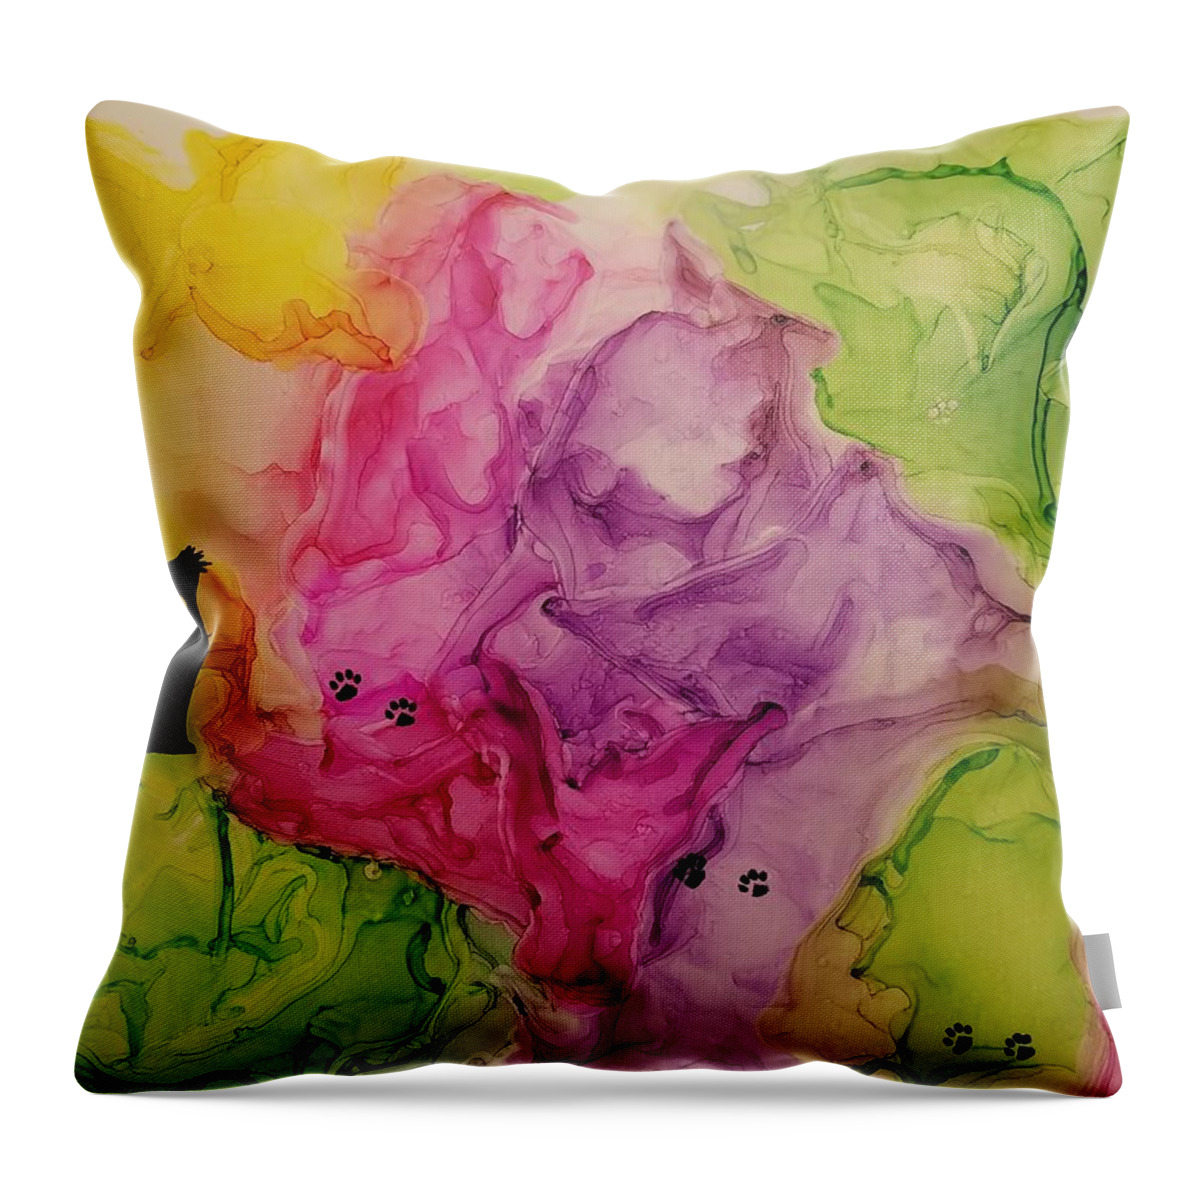 Abstract Throw Pillow featuring the painting Take Time To Smell The Flowers by Gerry Smith